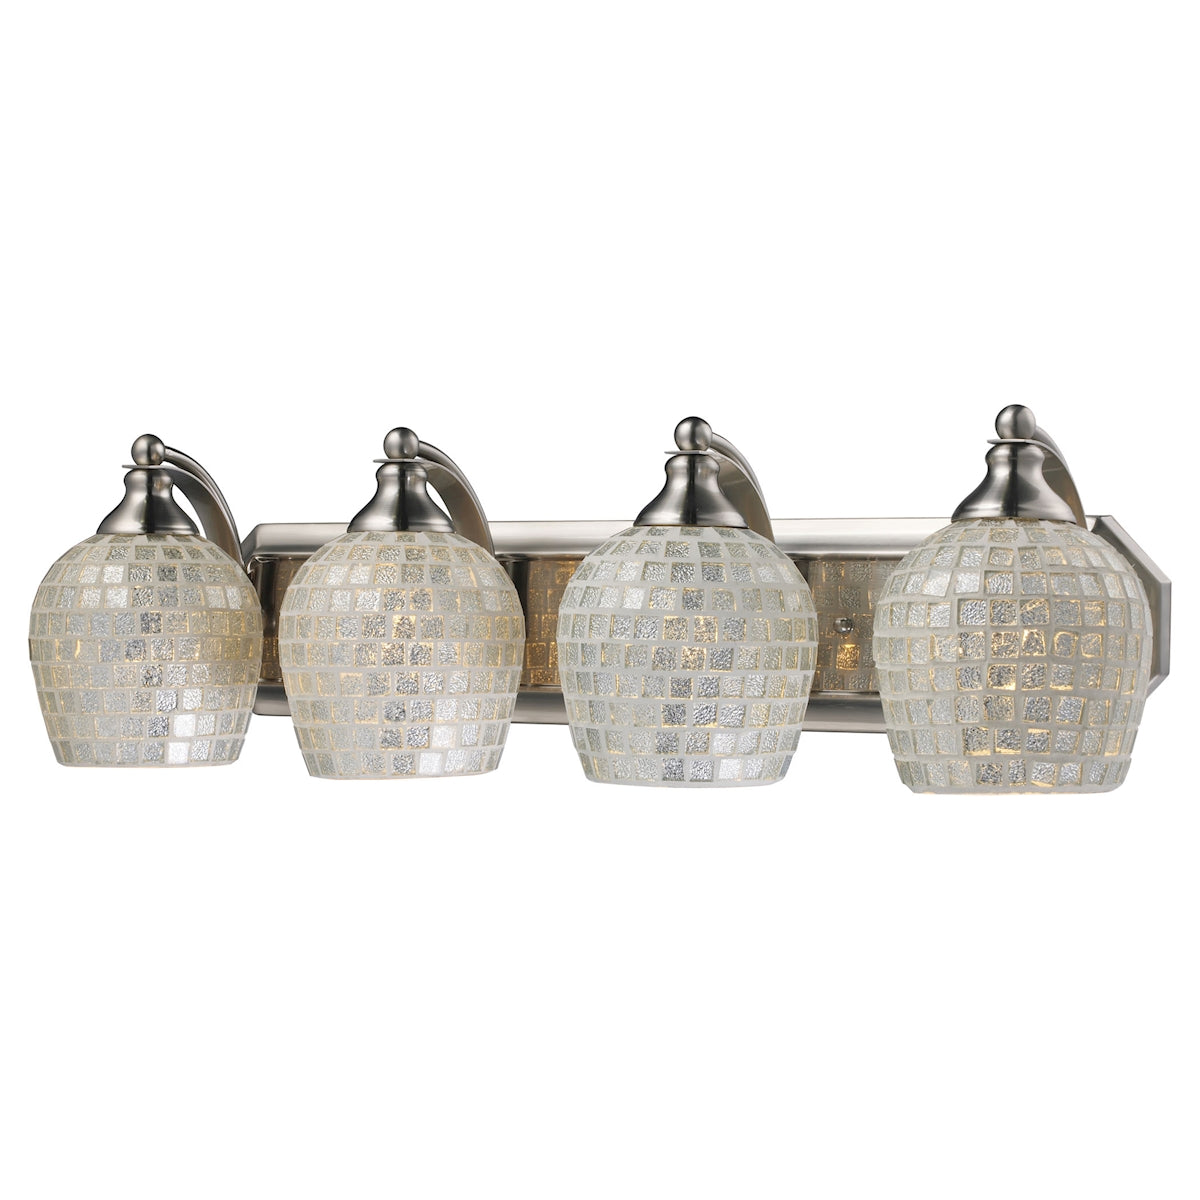 Mix-N-Match Vanity 4-Light Wall Lamp in Satin Nickel with Silver Glass